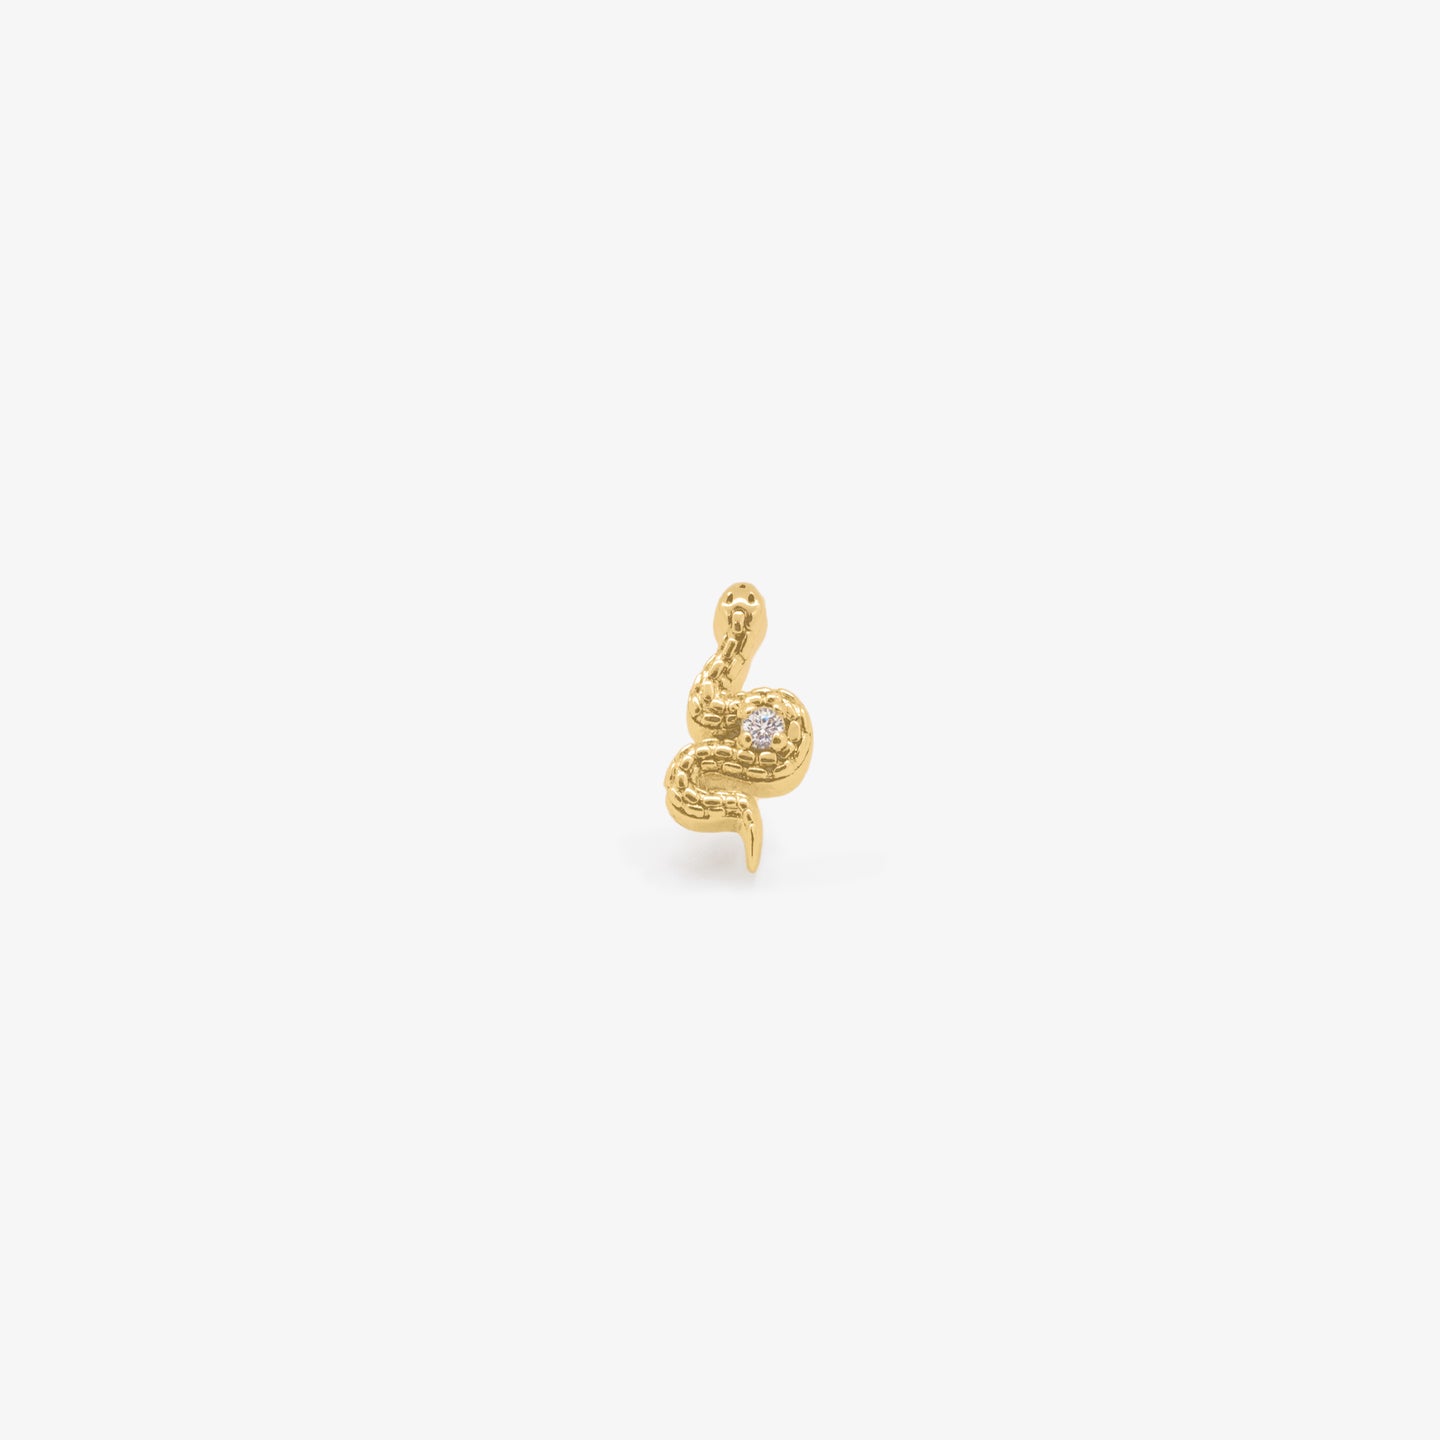 This is a small gold stud that looks like a snake with a cz accent color:null|gold